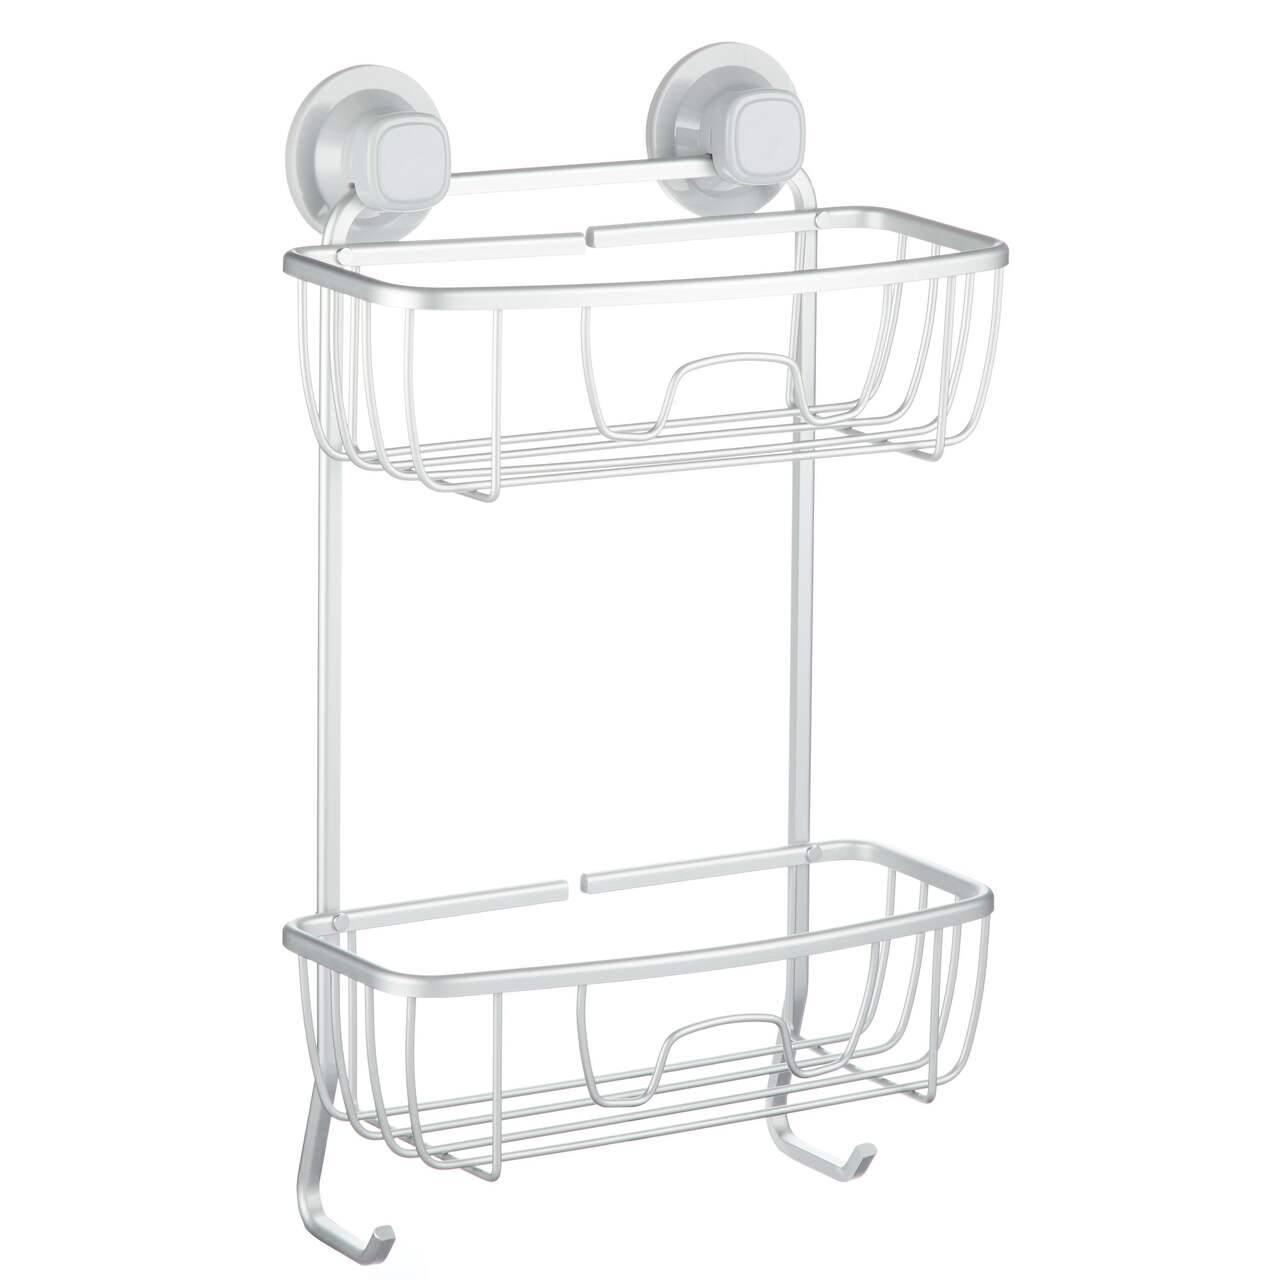 https://media-www.canadiantire.ca/product/living/home-decor/bed-bath-decor/0632485/for-living-aluminum-2-shelf-suction-shower-caddy-a4343c29-fbc4-47f2-9a84-56ce43dde614-jpgrendition.jpg?imdensity=1&imwidth=640&impolicy=mZoom